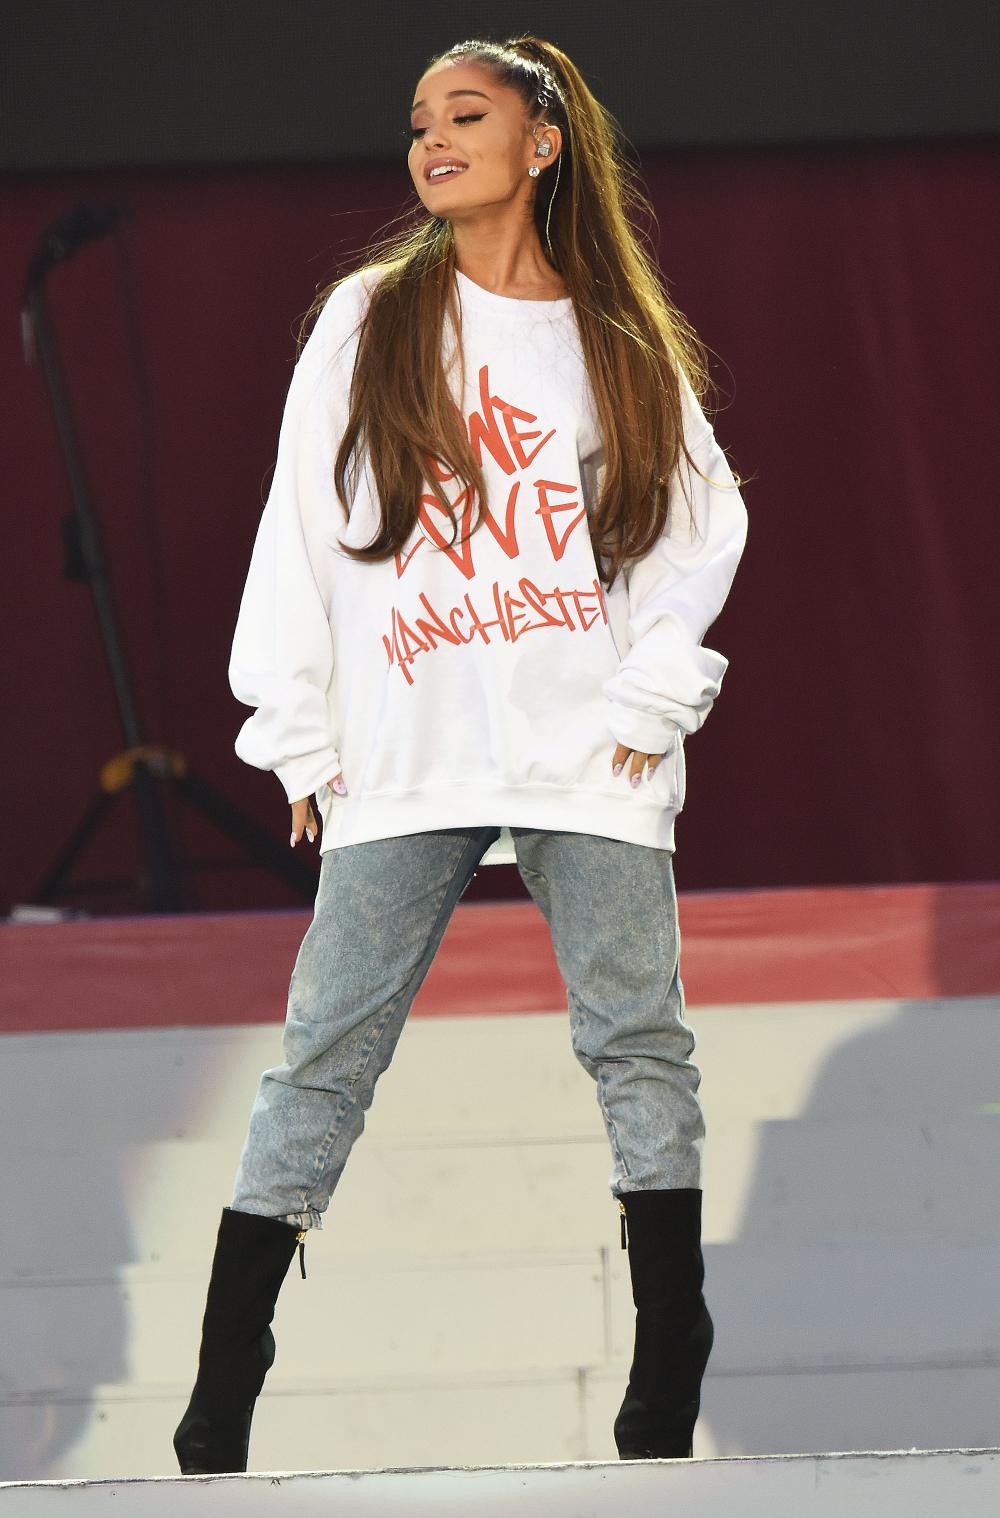 Ariana Grande Clothes and Outfits, Page 17